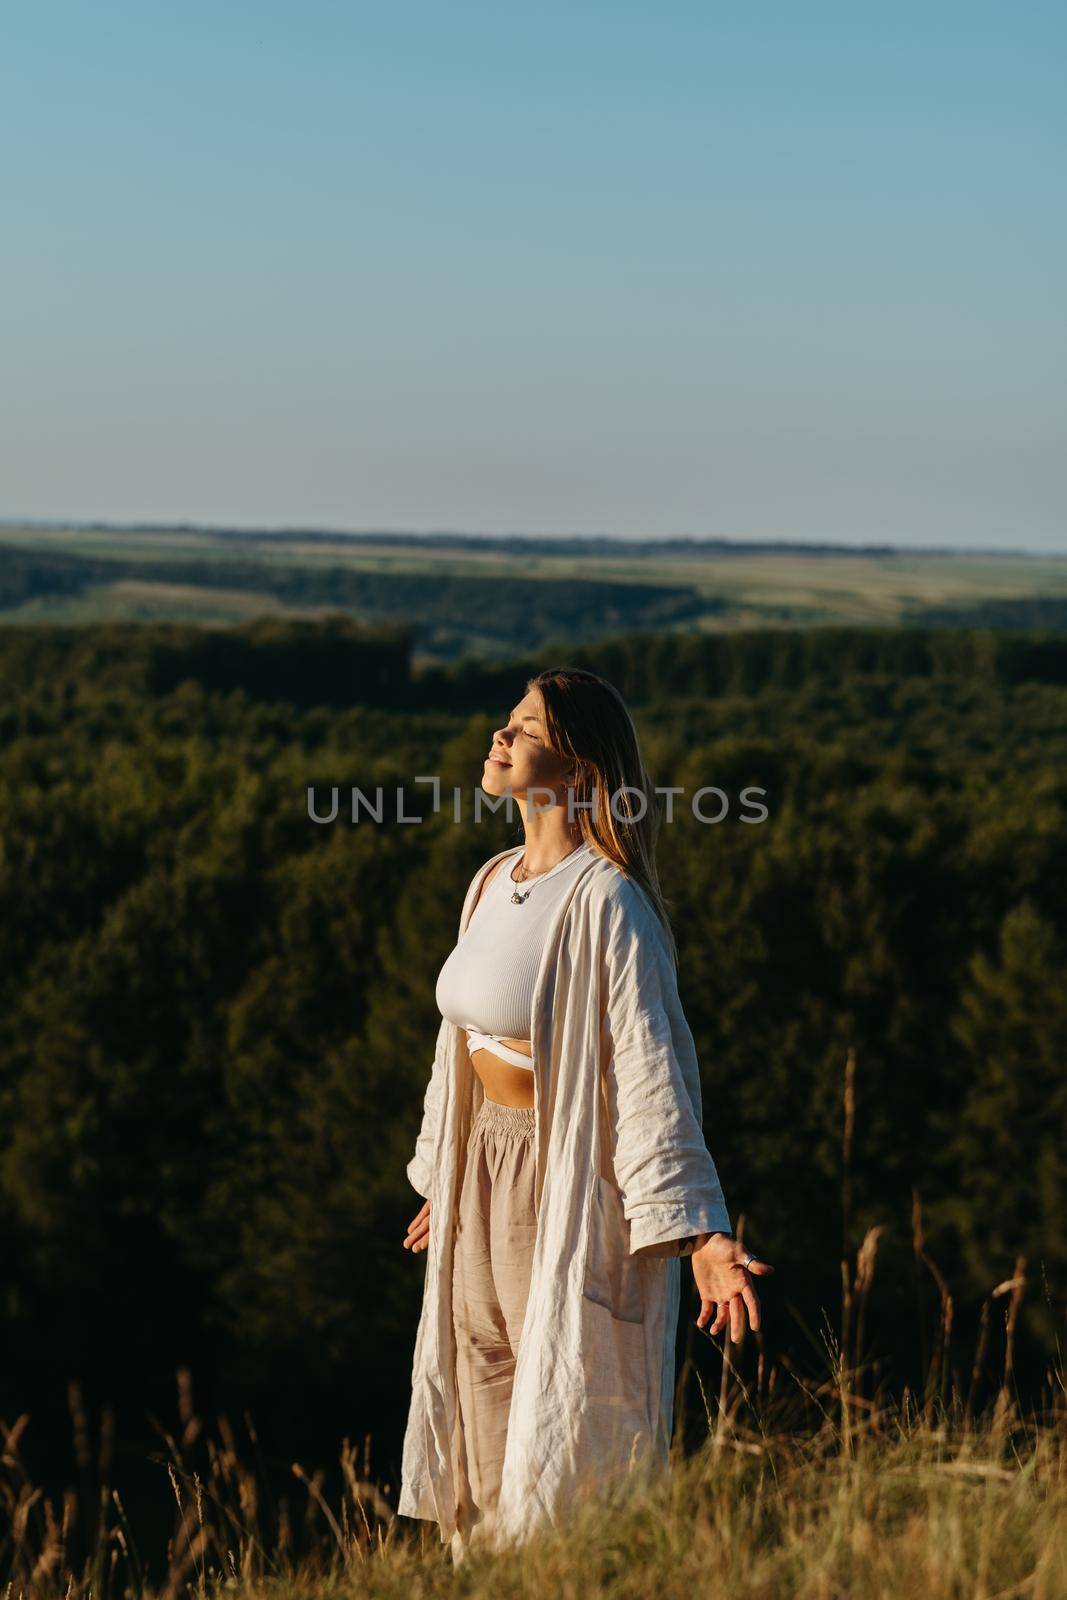 Young Woman Meditating and Catching Sunlight Outdoors at Sunset with Scenic Landscape on Background